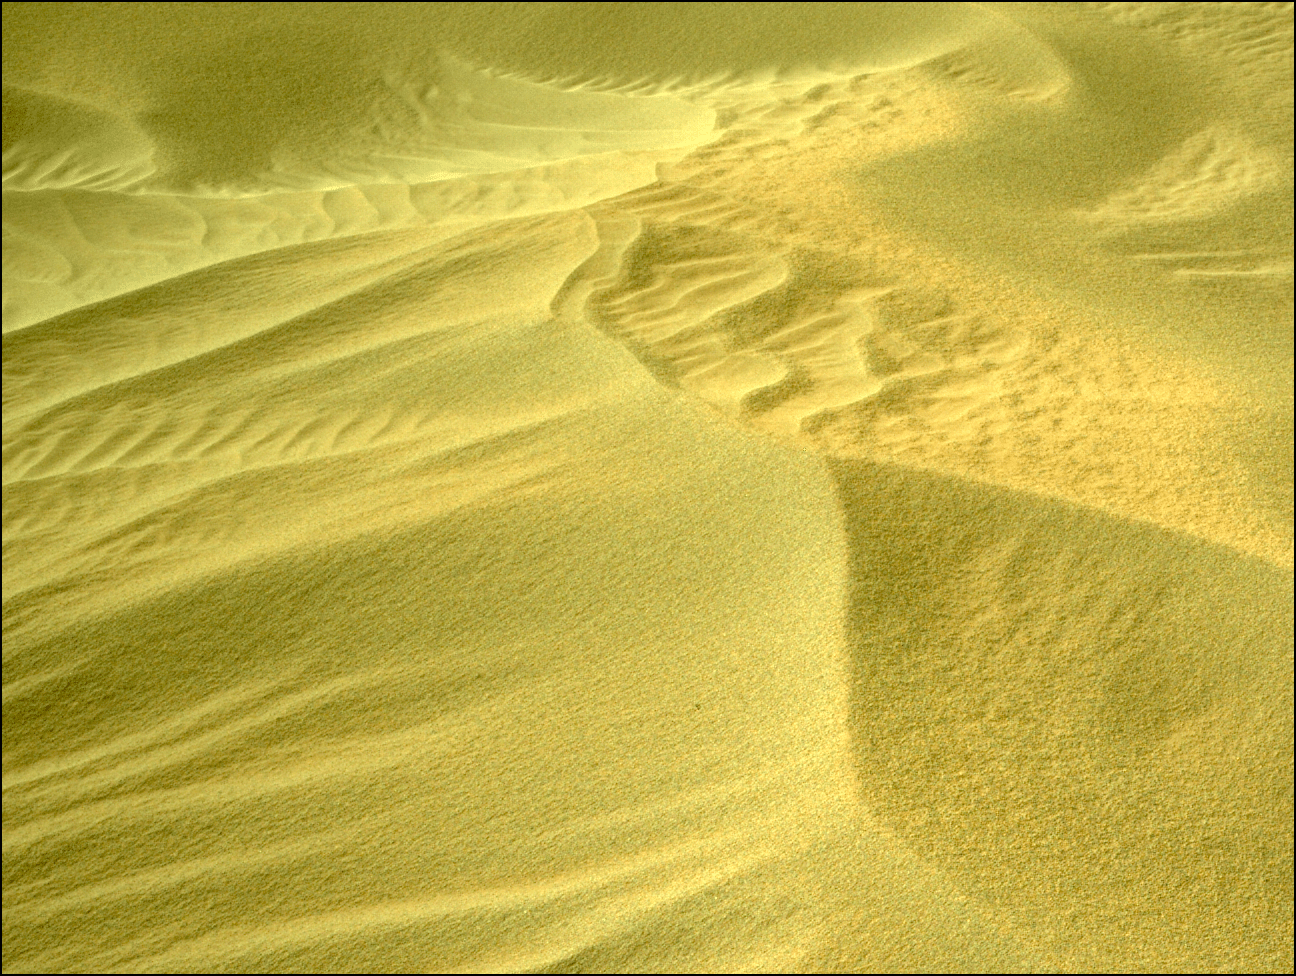 Mars dunes captured by the Perseverance rover on September 25 with its navigation camera - NASA/JPL-Caltech